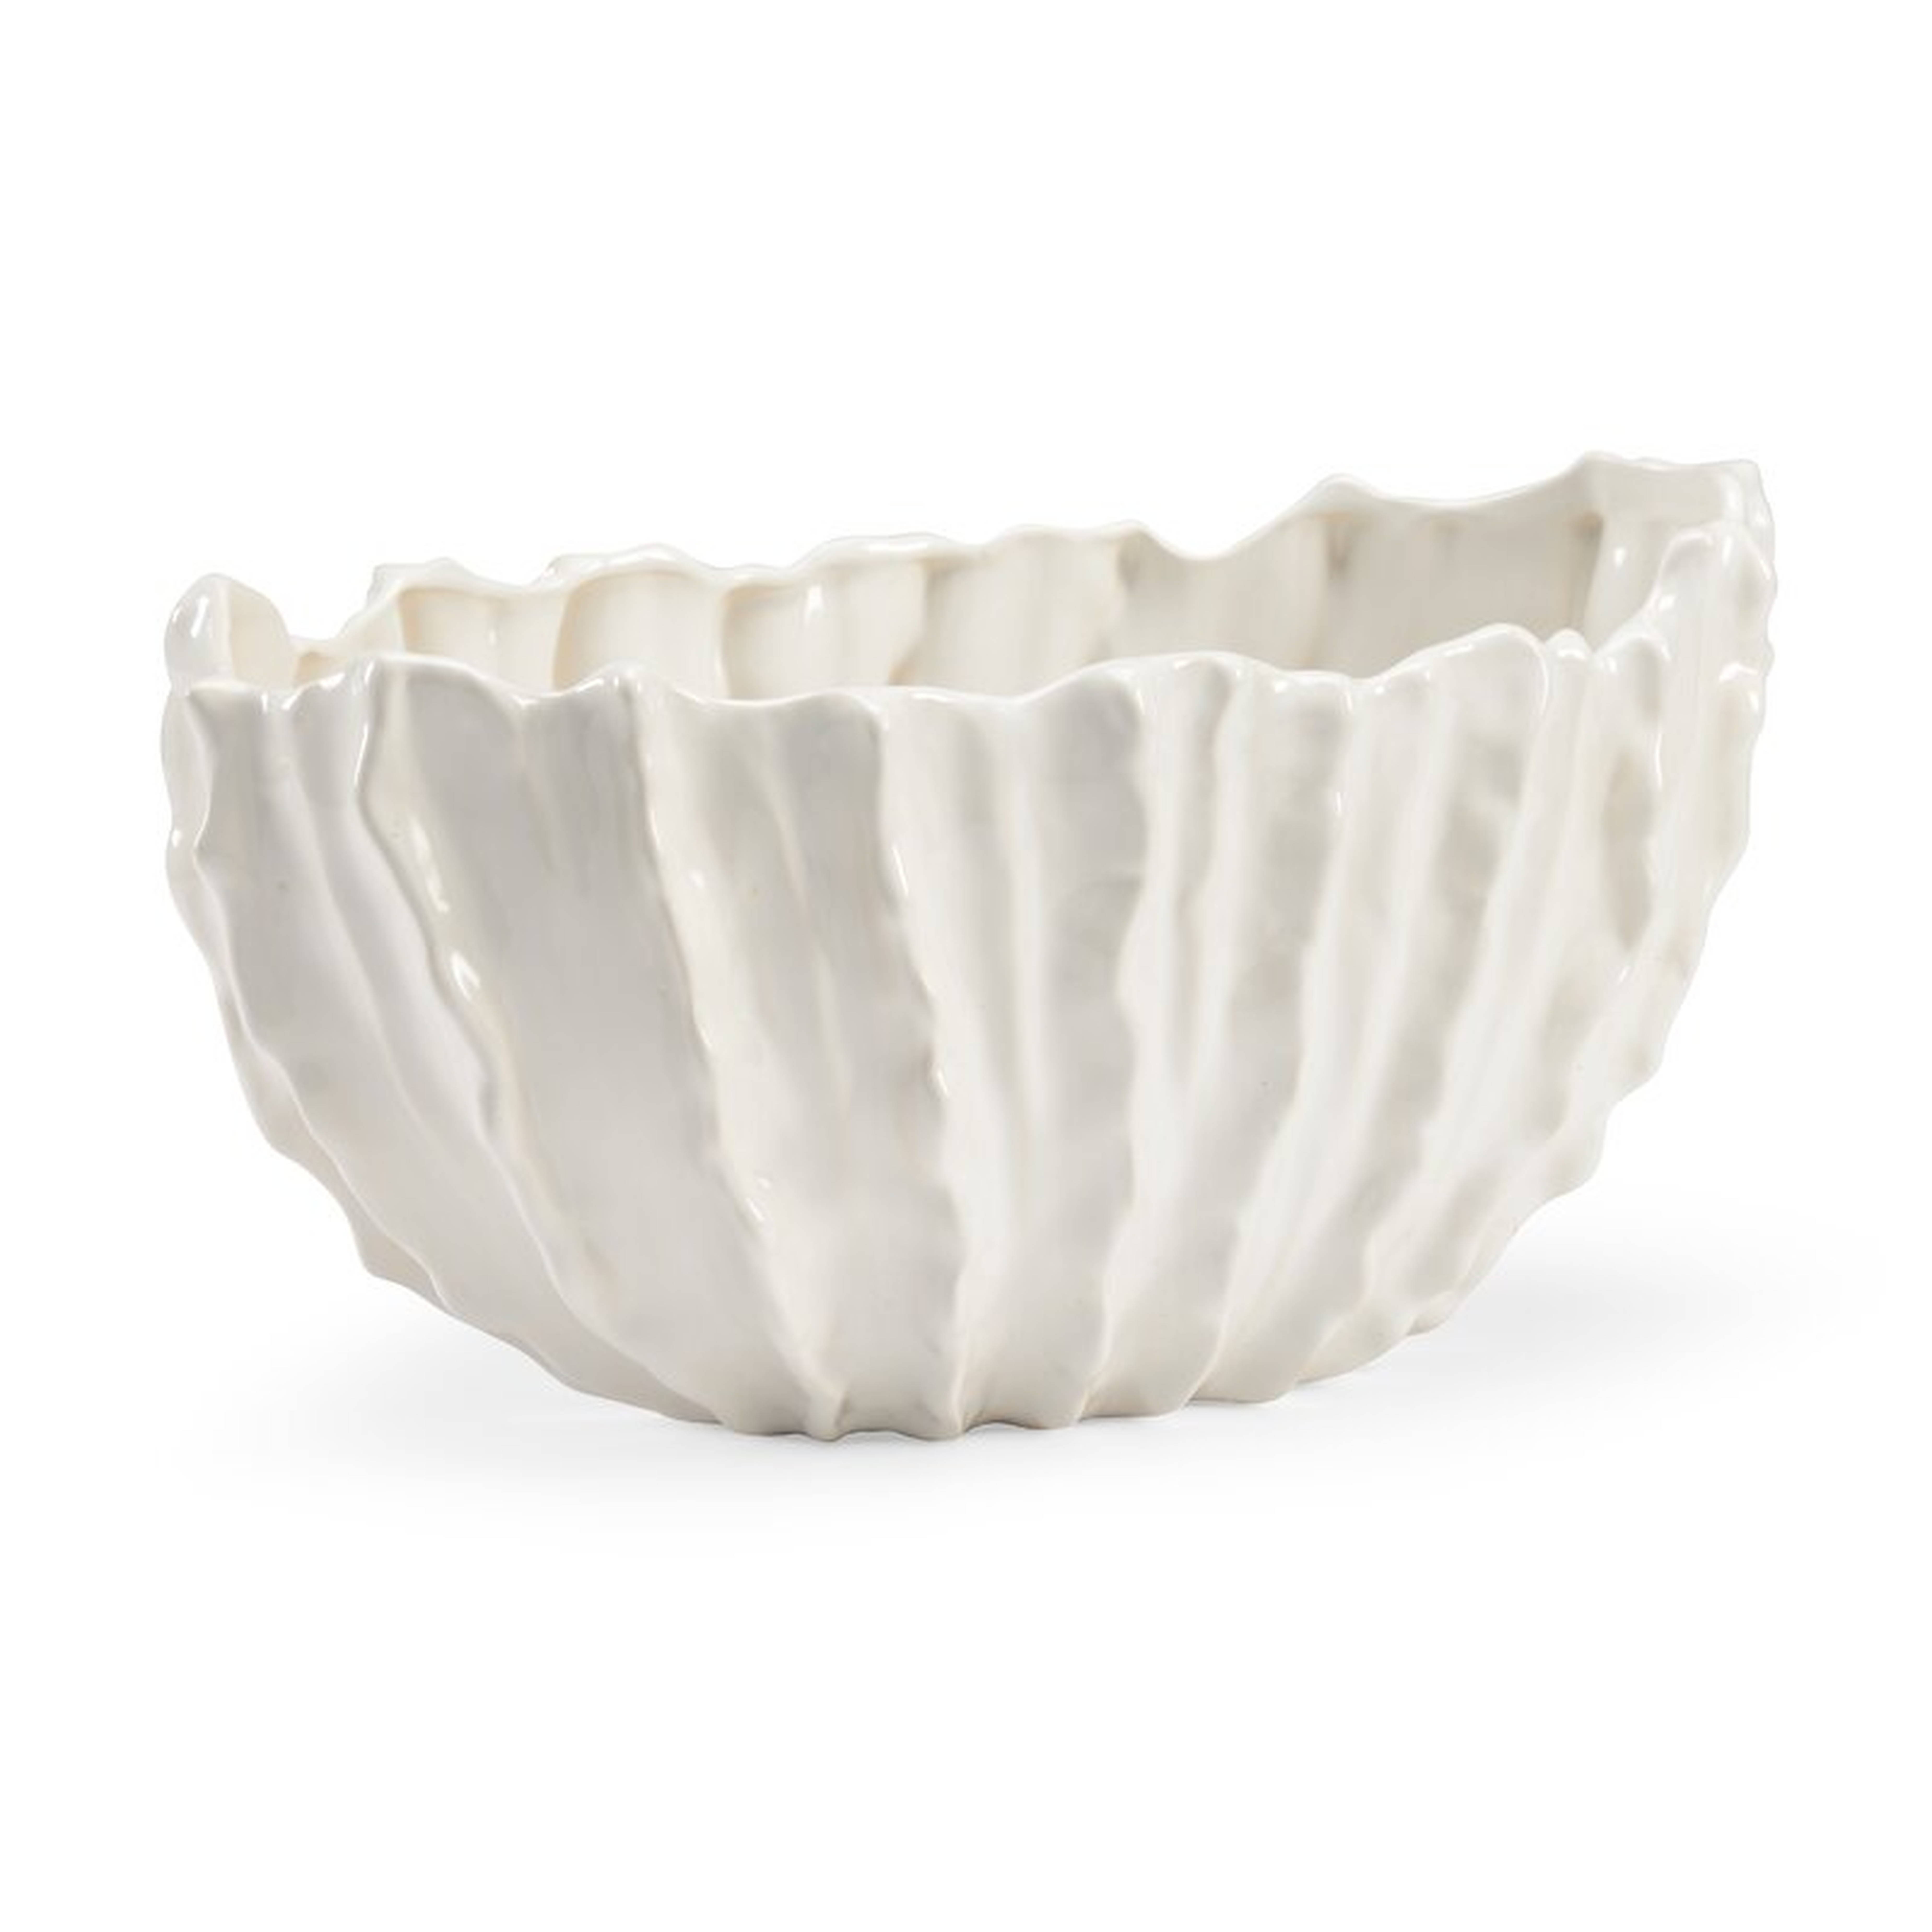 Chelsea House Porcelain Traditional Decorative Bowl in White - Perigold